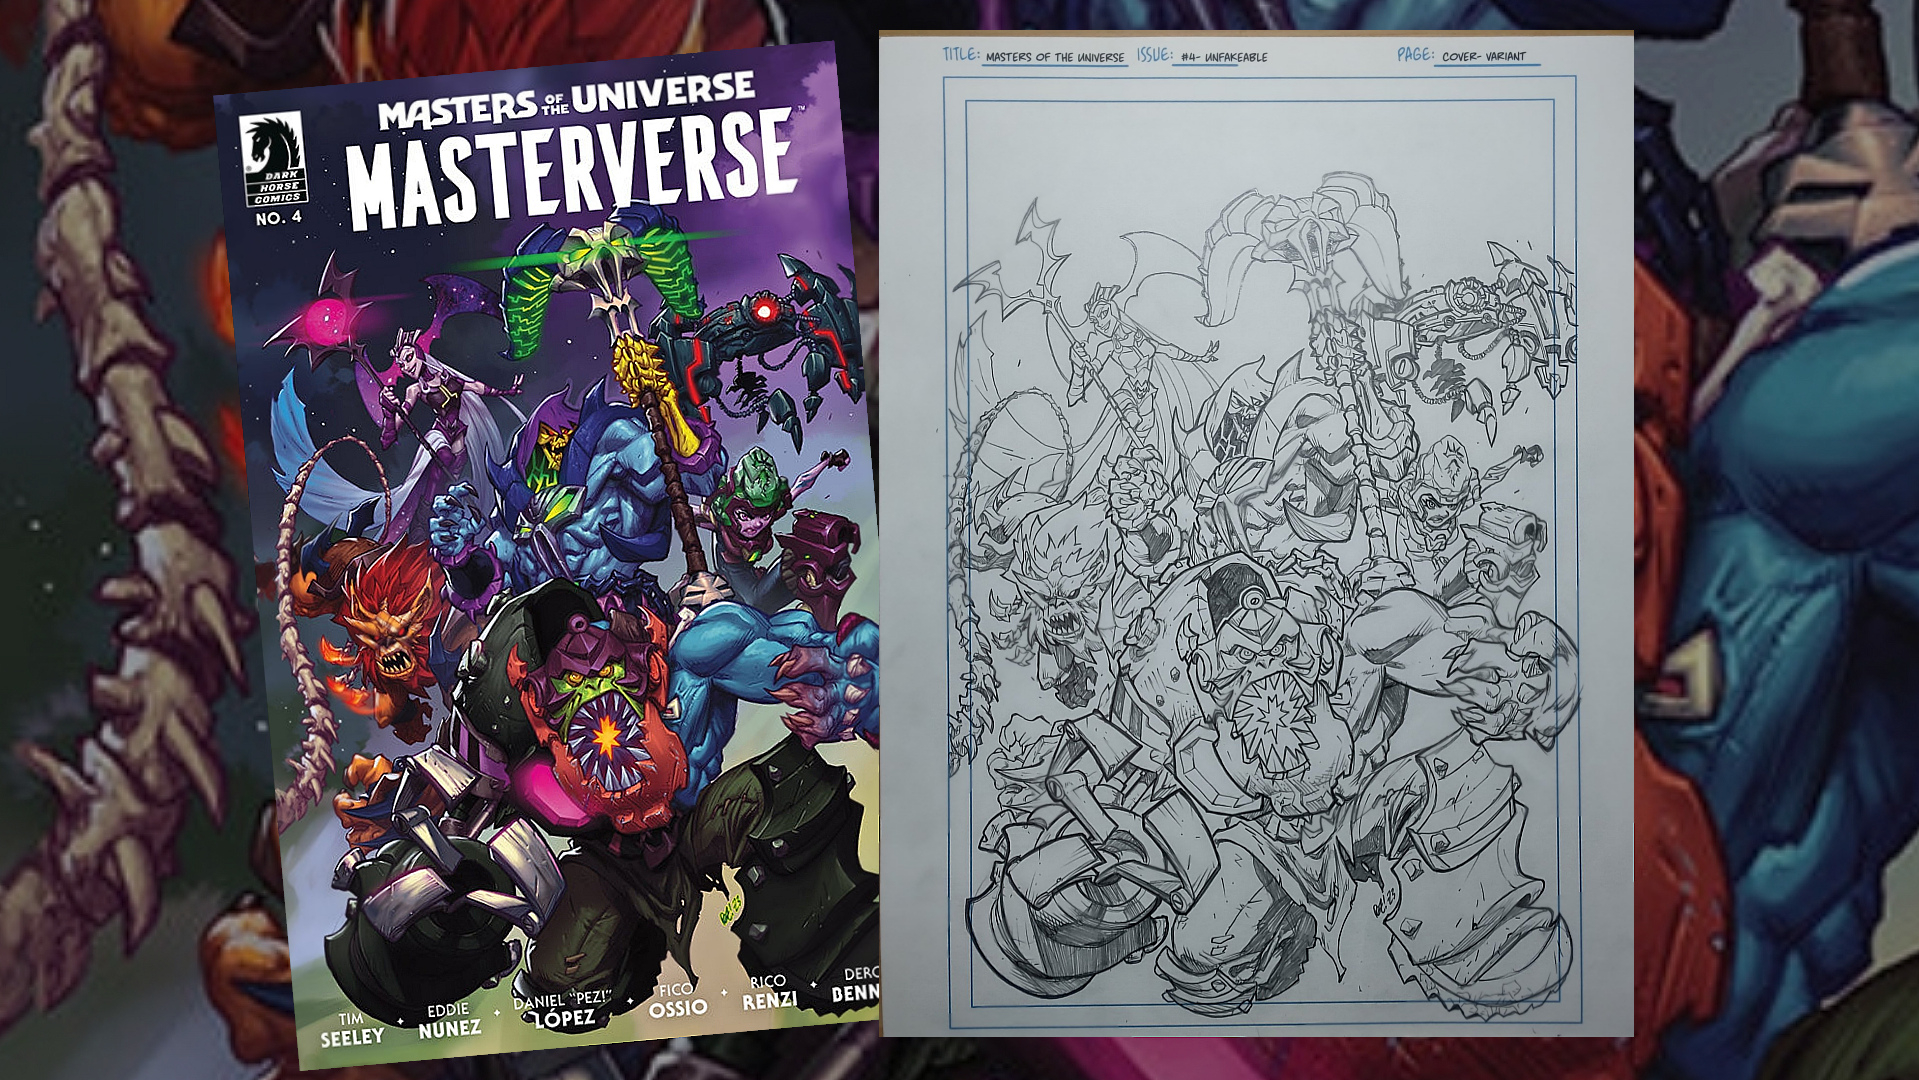 The Original Variant Cover Art for Masterverse Comic Issue #4 is available for sale